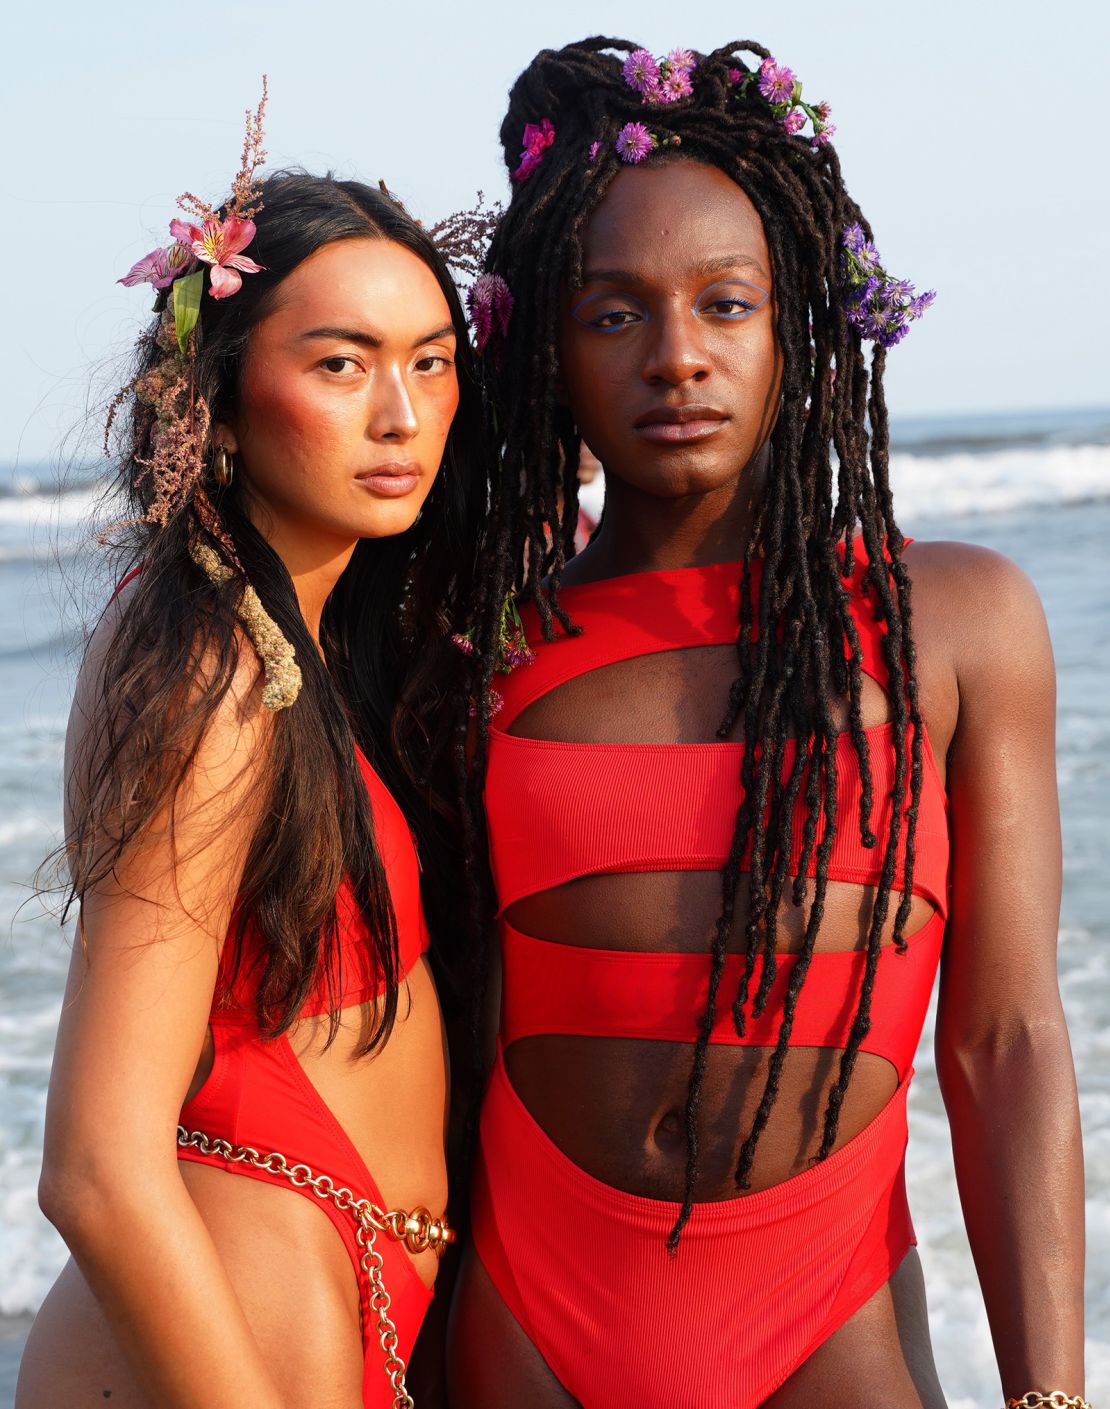 Chromat has been at the forefront of inclusive swimwear campaigns and bathing suit design.